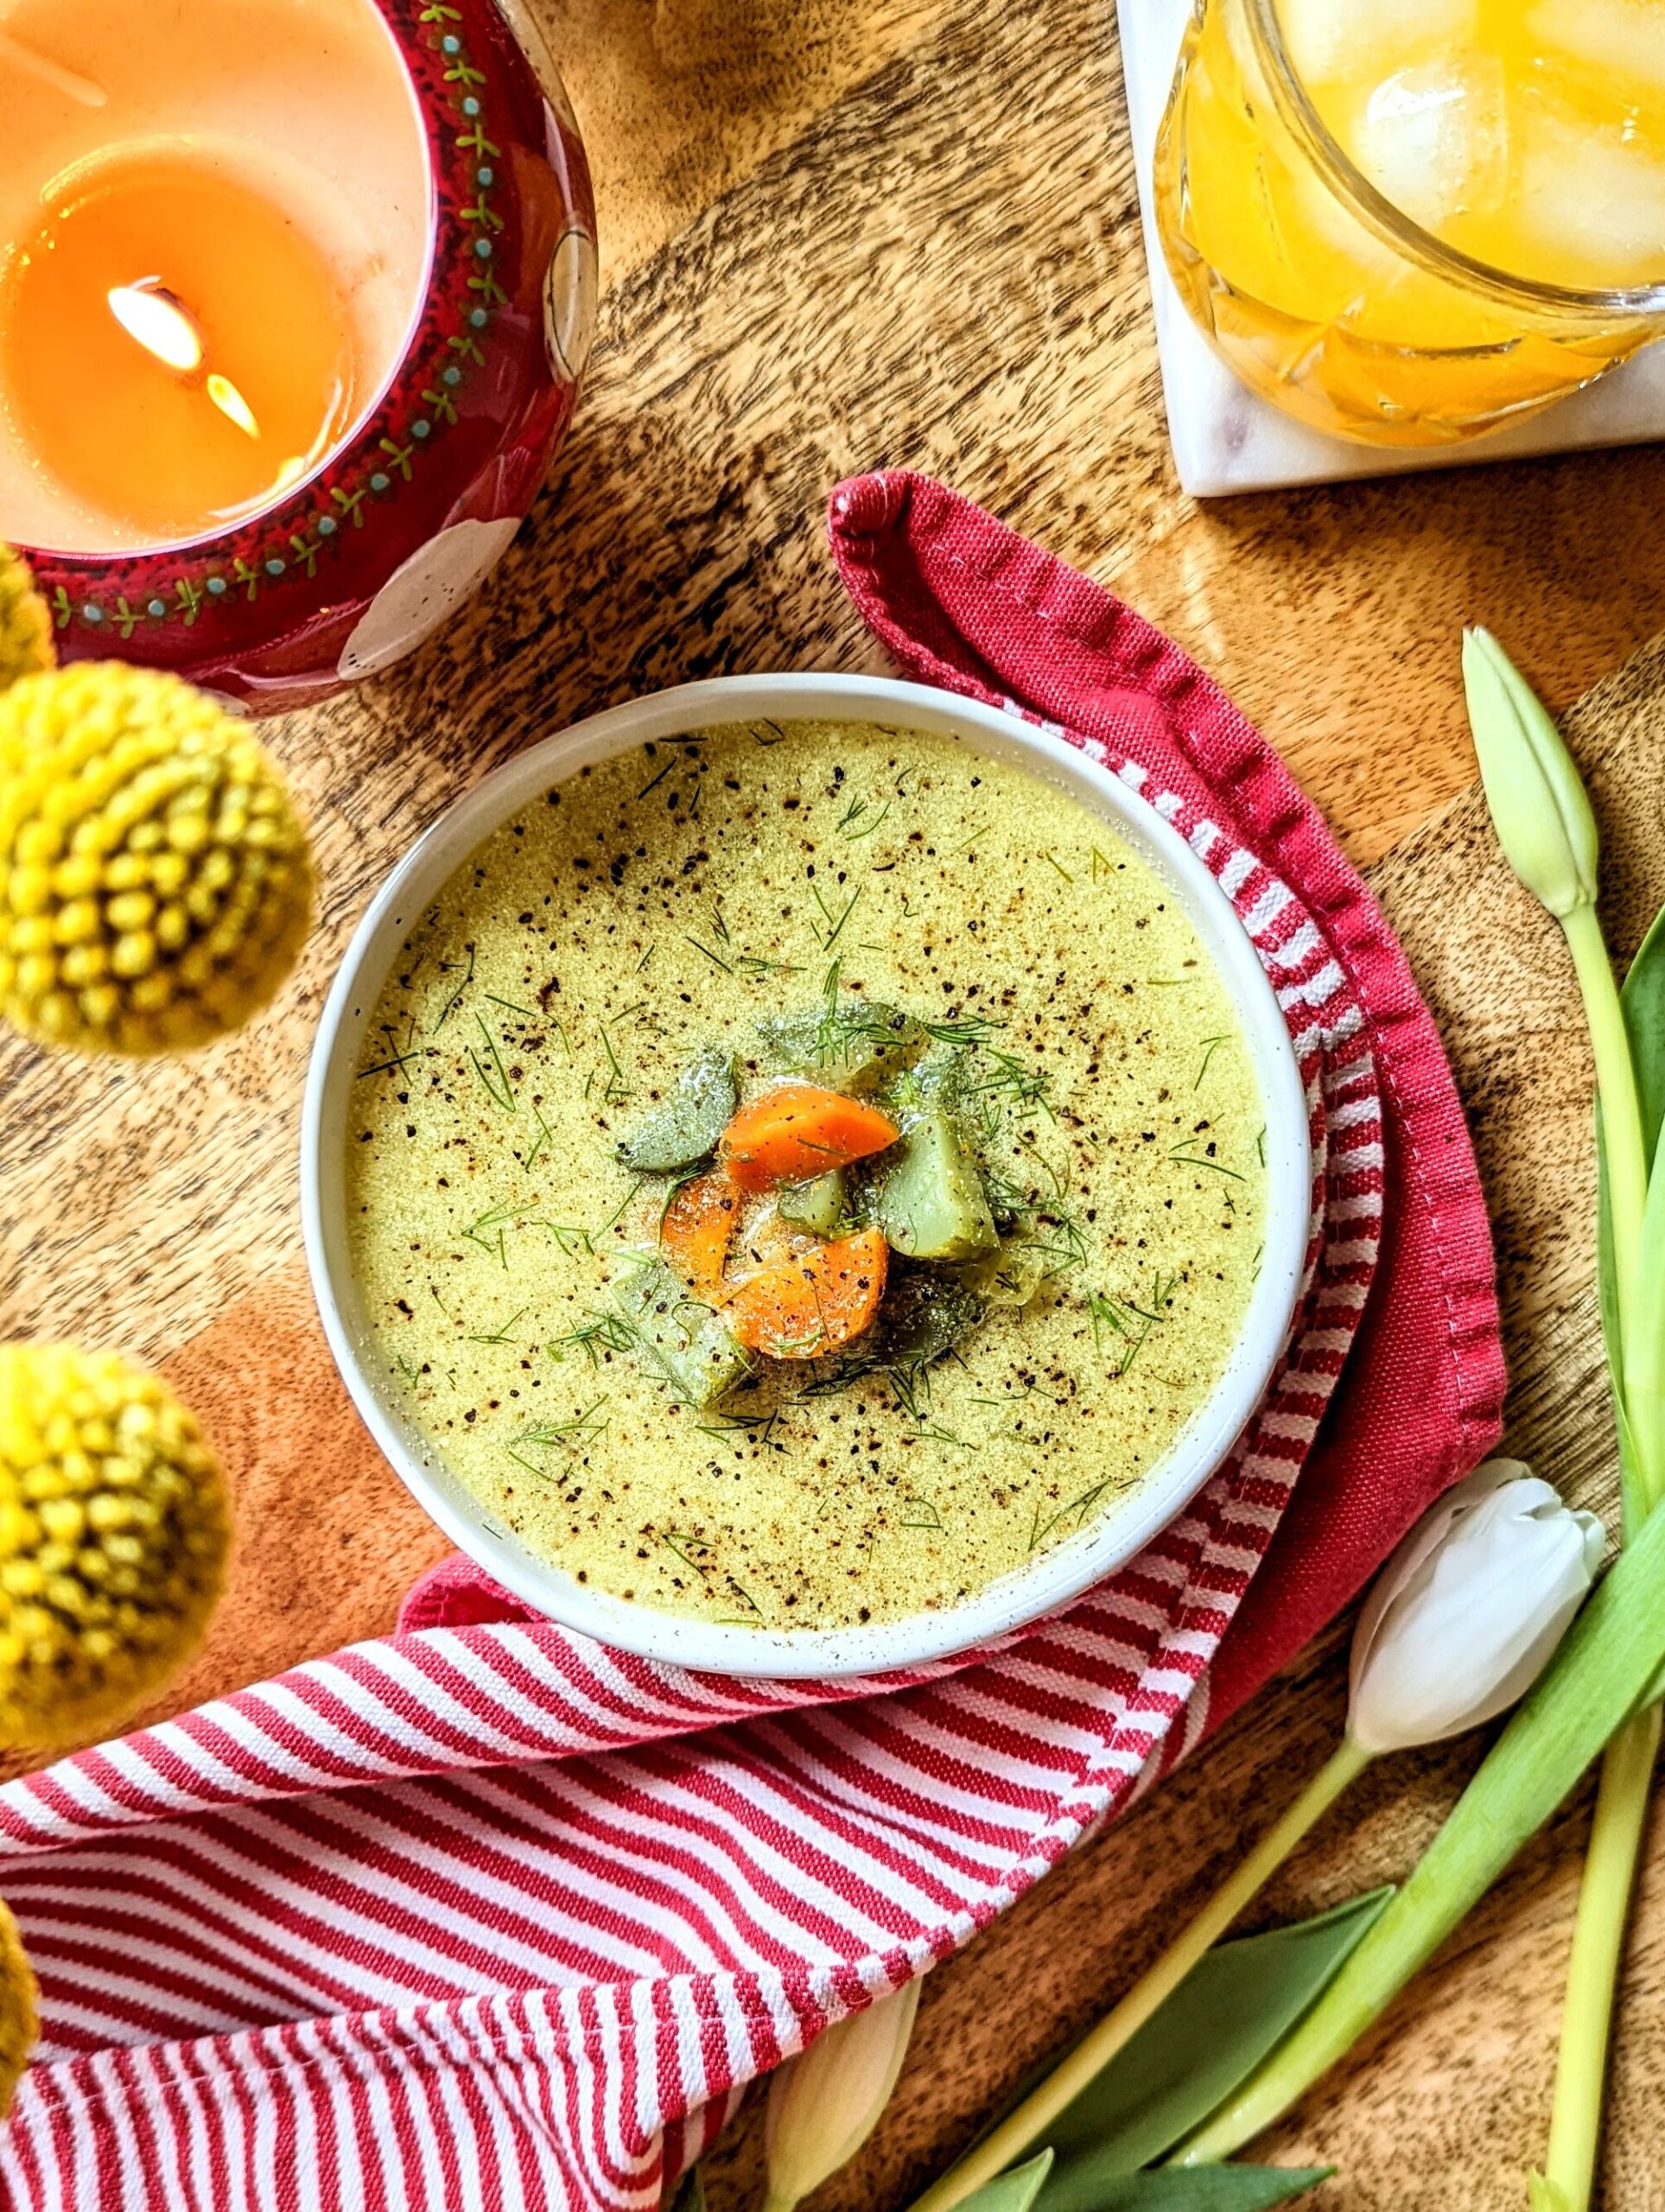 A birds eye view of a table set for lunch. A bowl of soup, a glass of orange juice, lit candles, and spring florals can be seen around the bowl of Lazy Dill Pickle Soup.